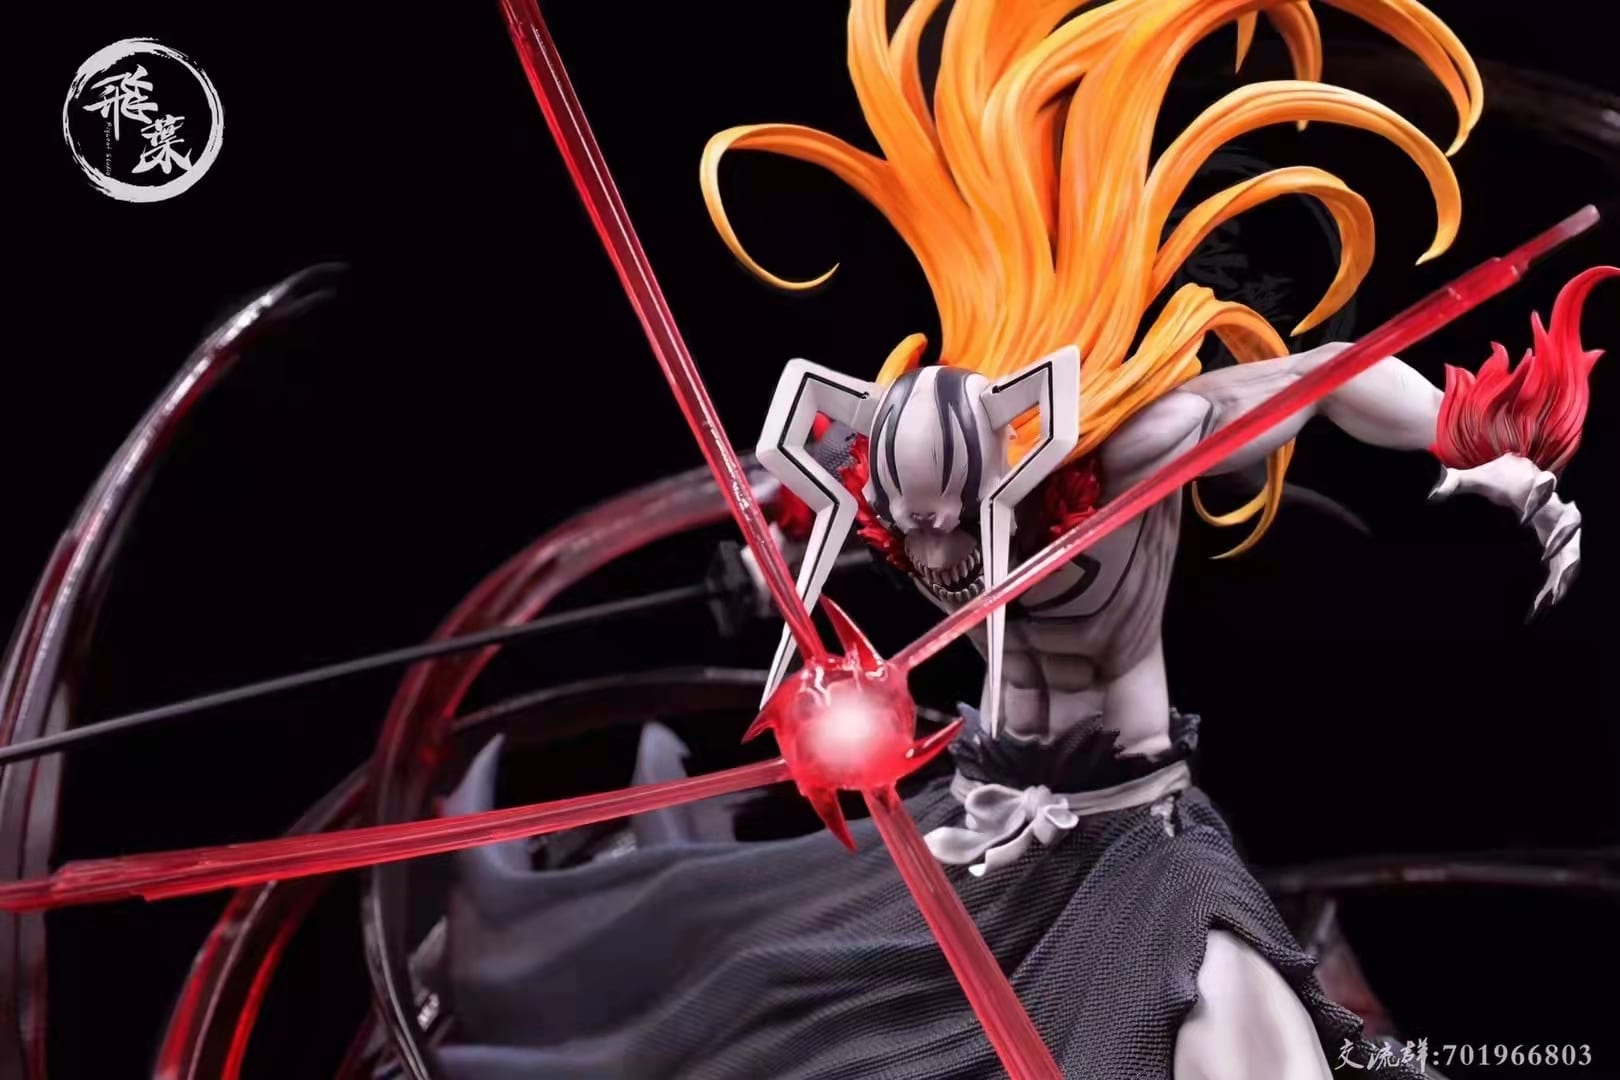 Four Things Every Bleach Fan Should Know About Ichigo